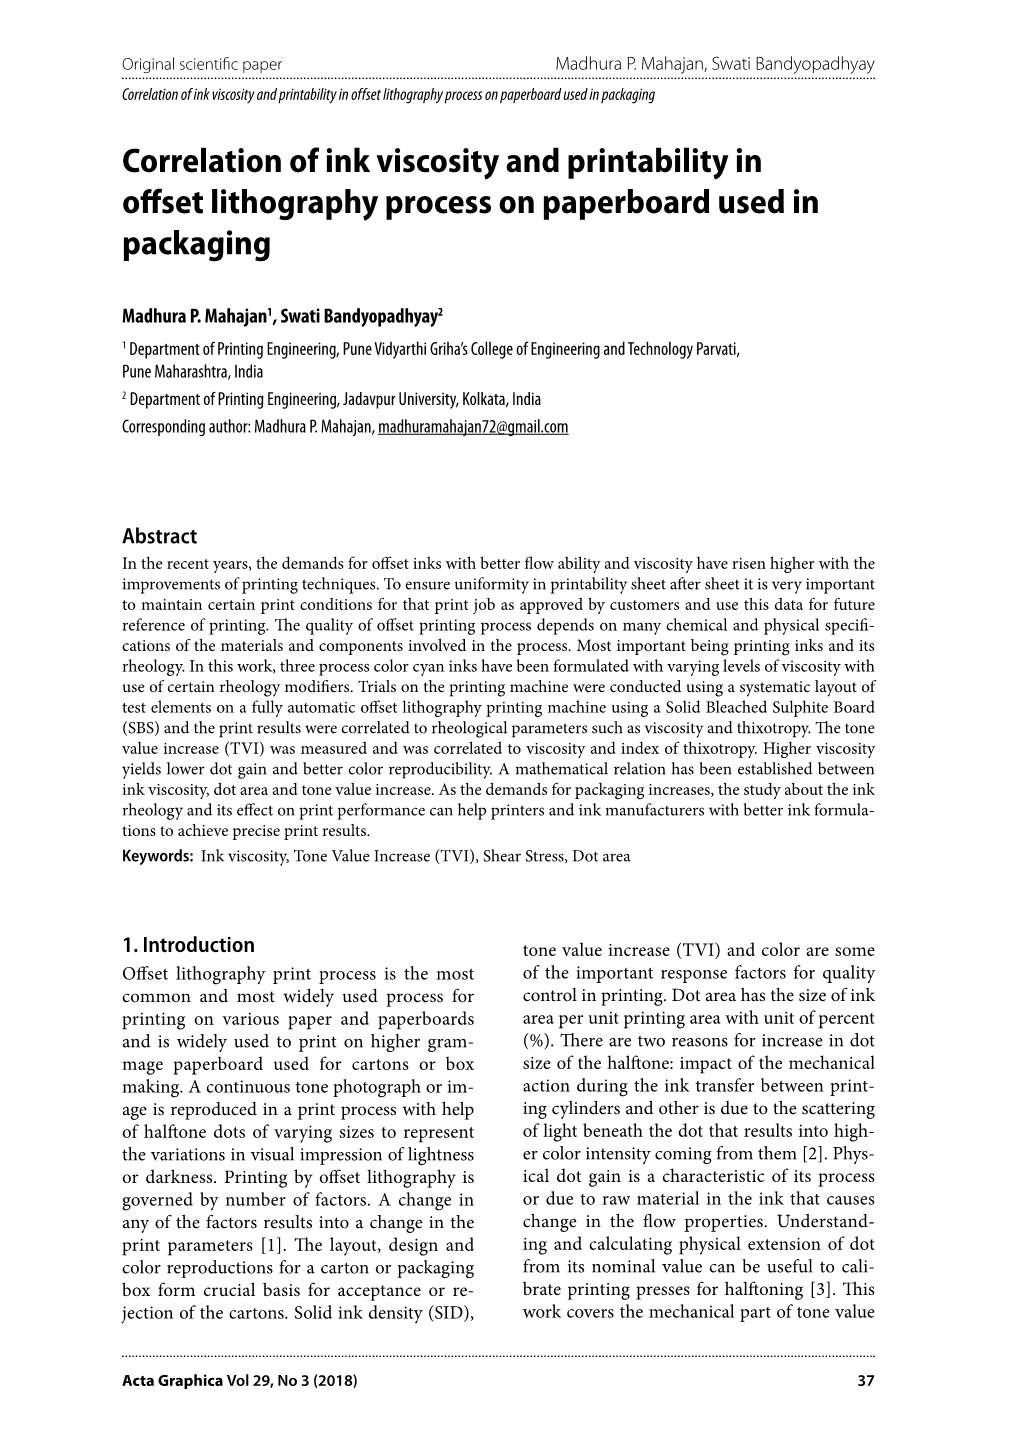 Correlation of Ink Viscosity and Printability in Offset Lithography Process on Paperboard Used in Packaging